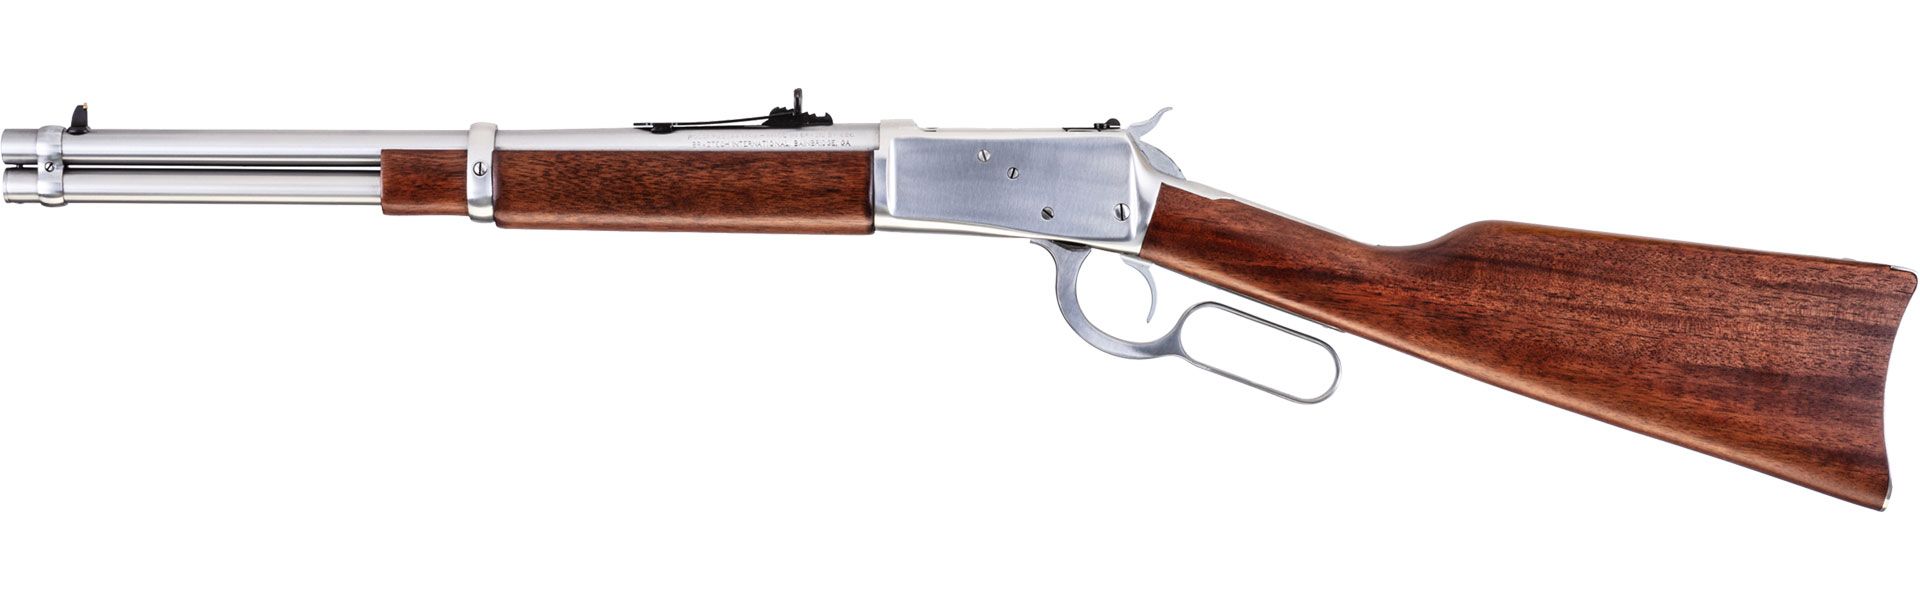 R92 Hardwood, .44 MAG, Polished Stainless, 16 In.